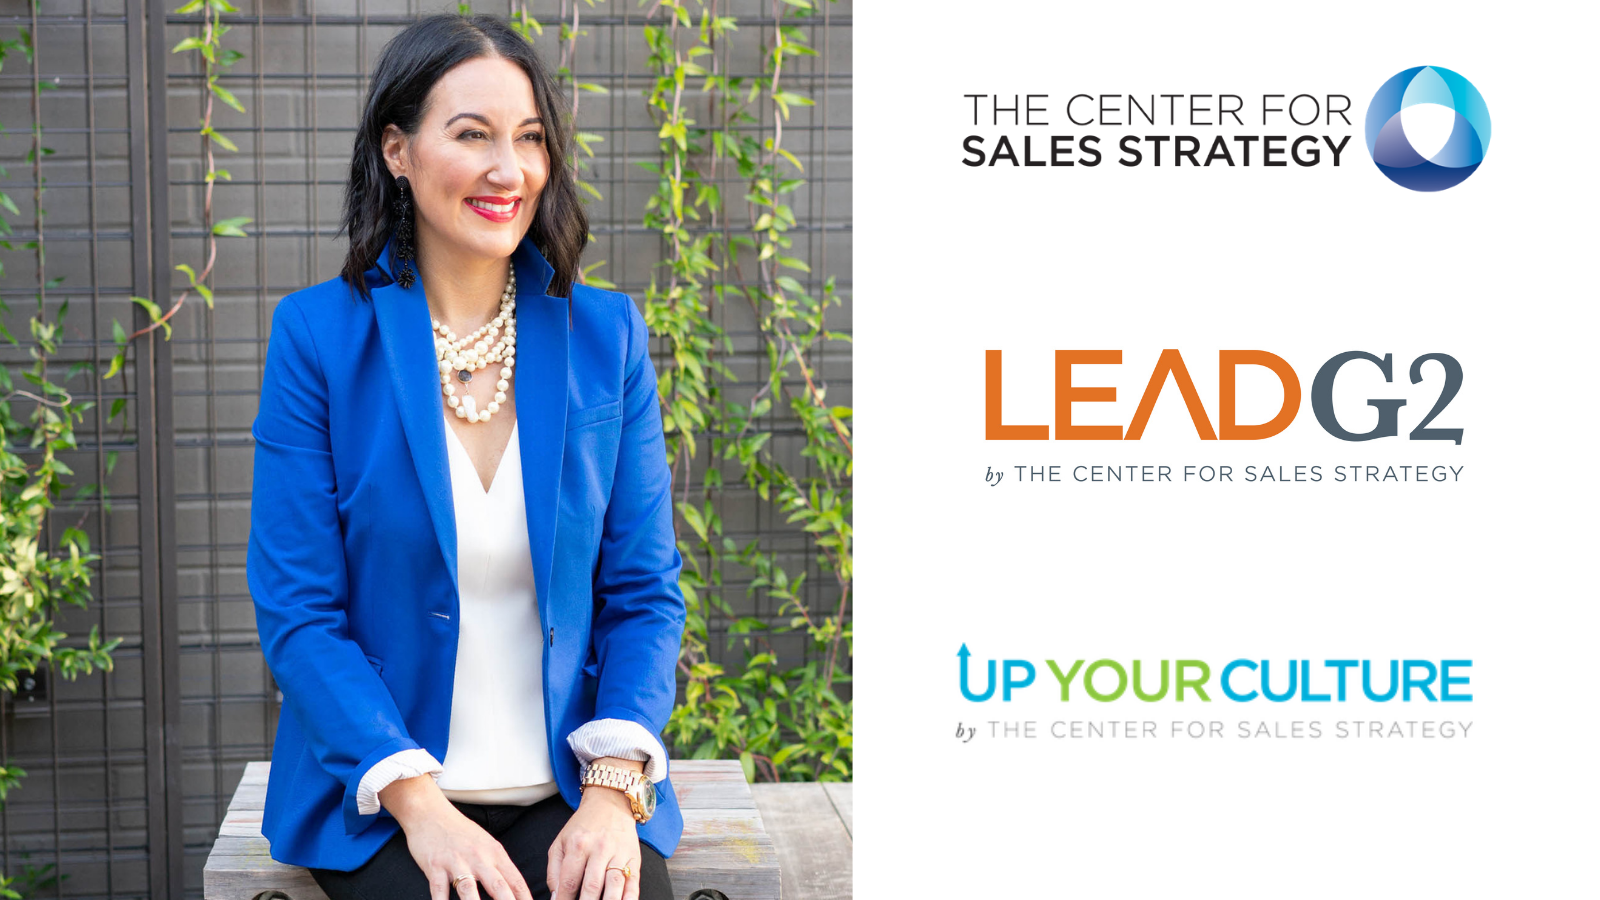 The Center for Sales Strategy Appoints Elissa Nauful, Successful Sales Leader and Entrepreneur, as Director of Sales